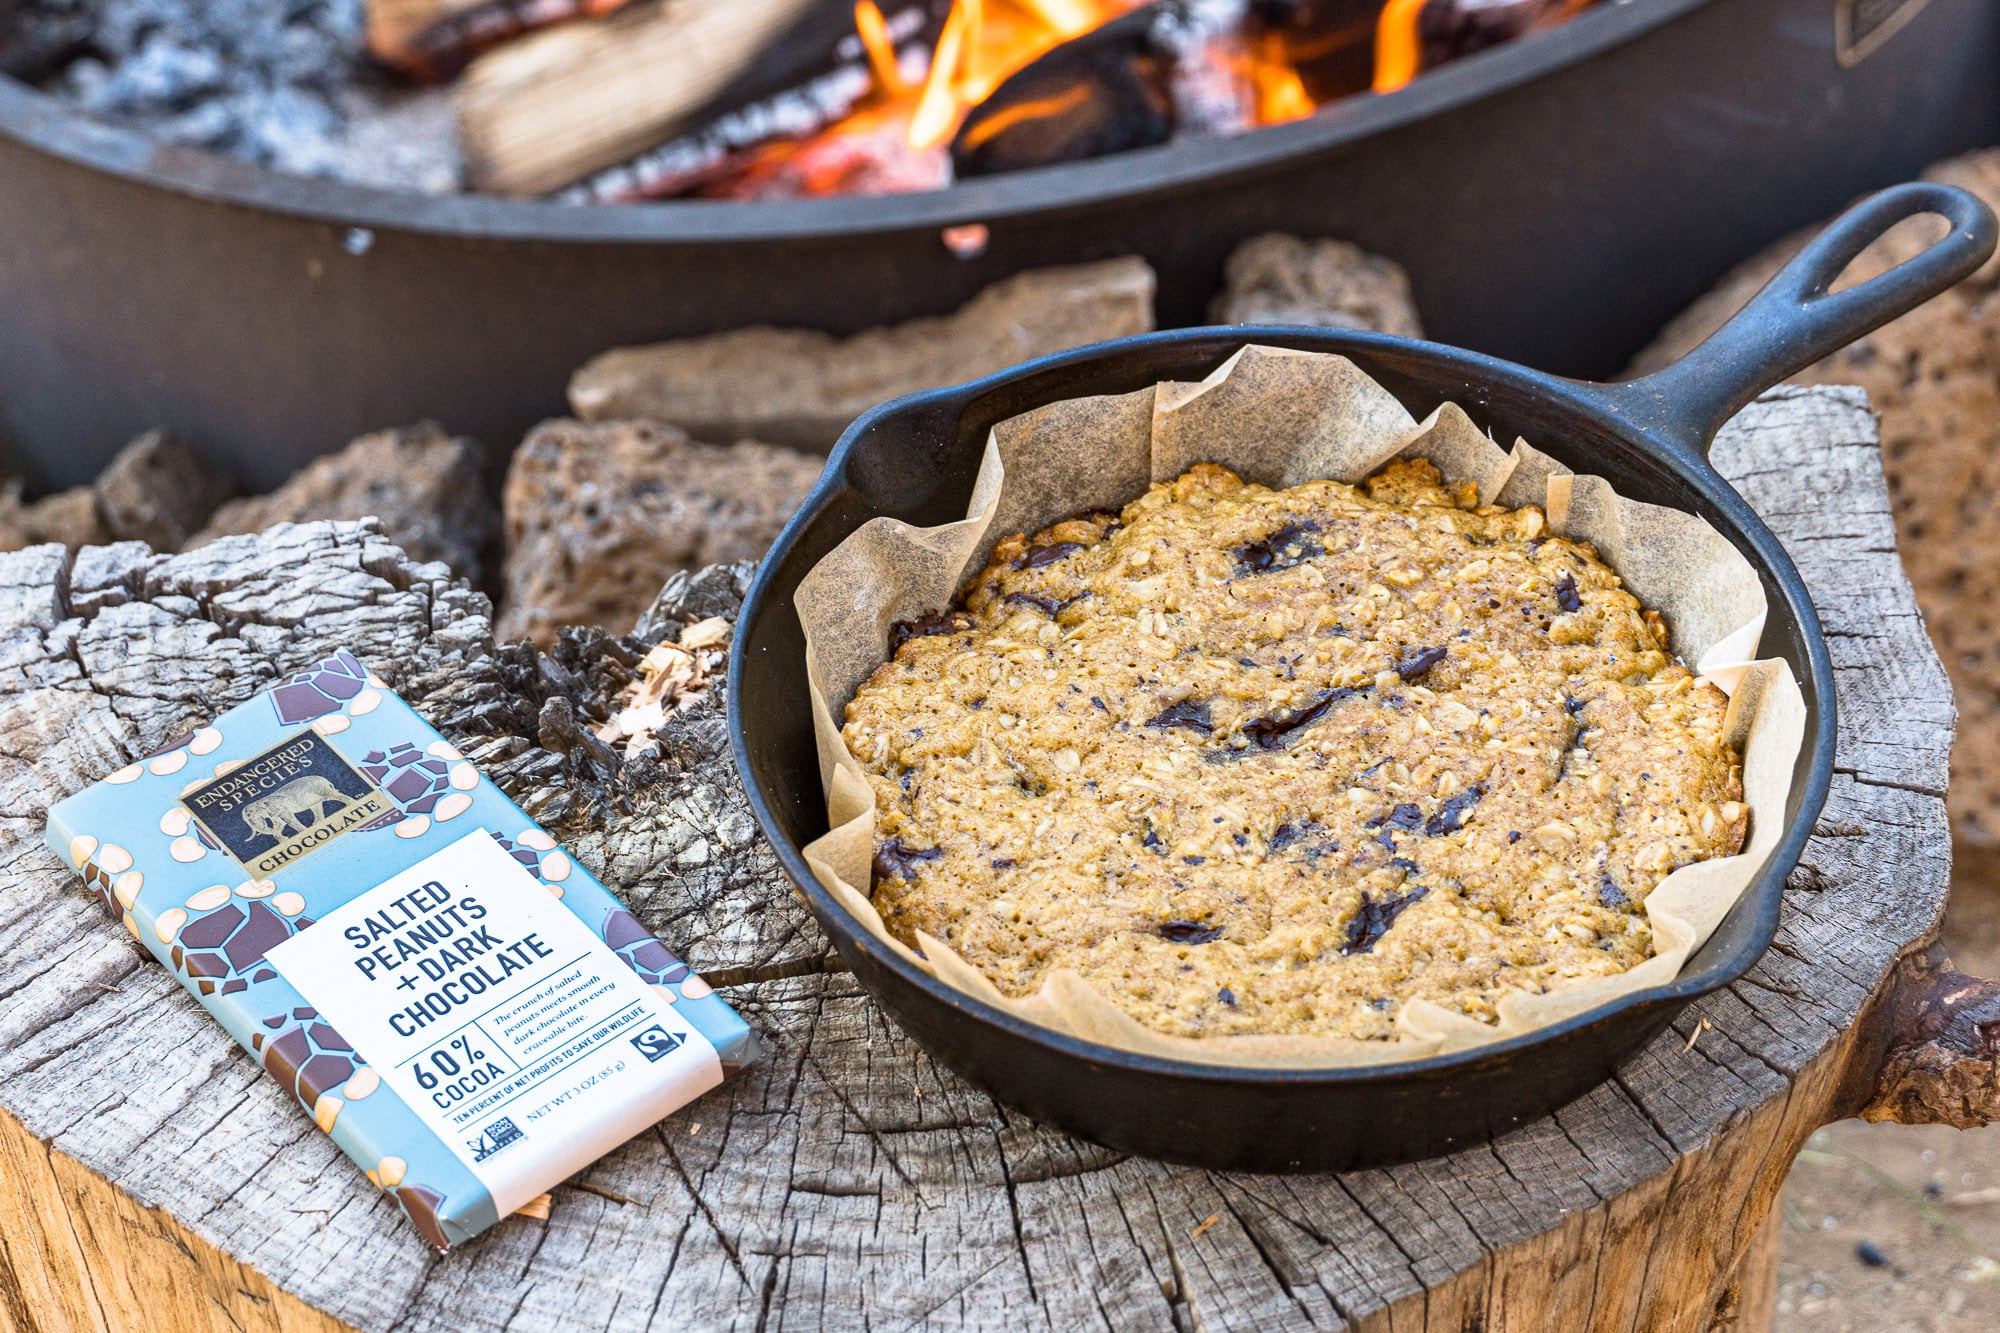 A chocolate chip cookie in a cast iron skillet set on a wood log.